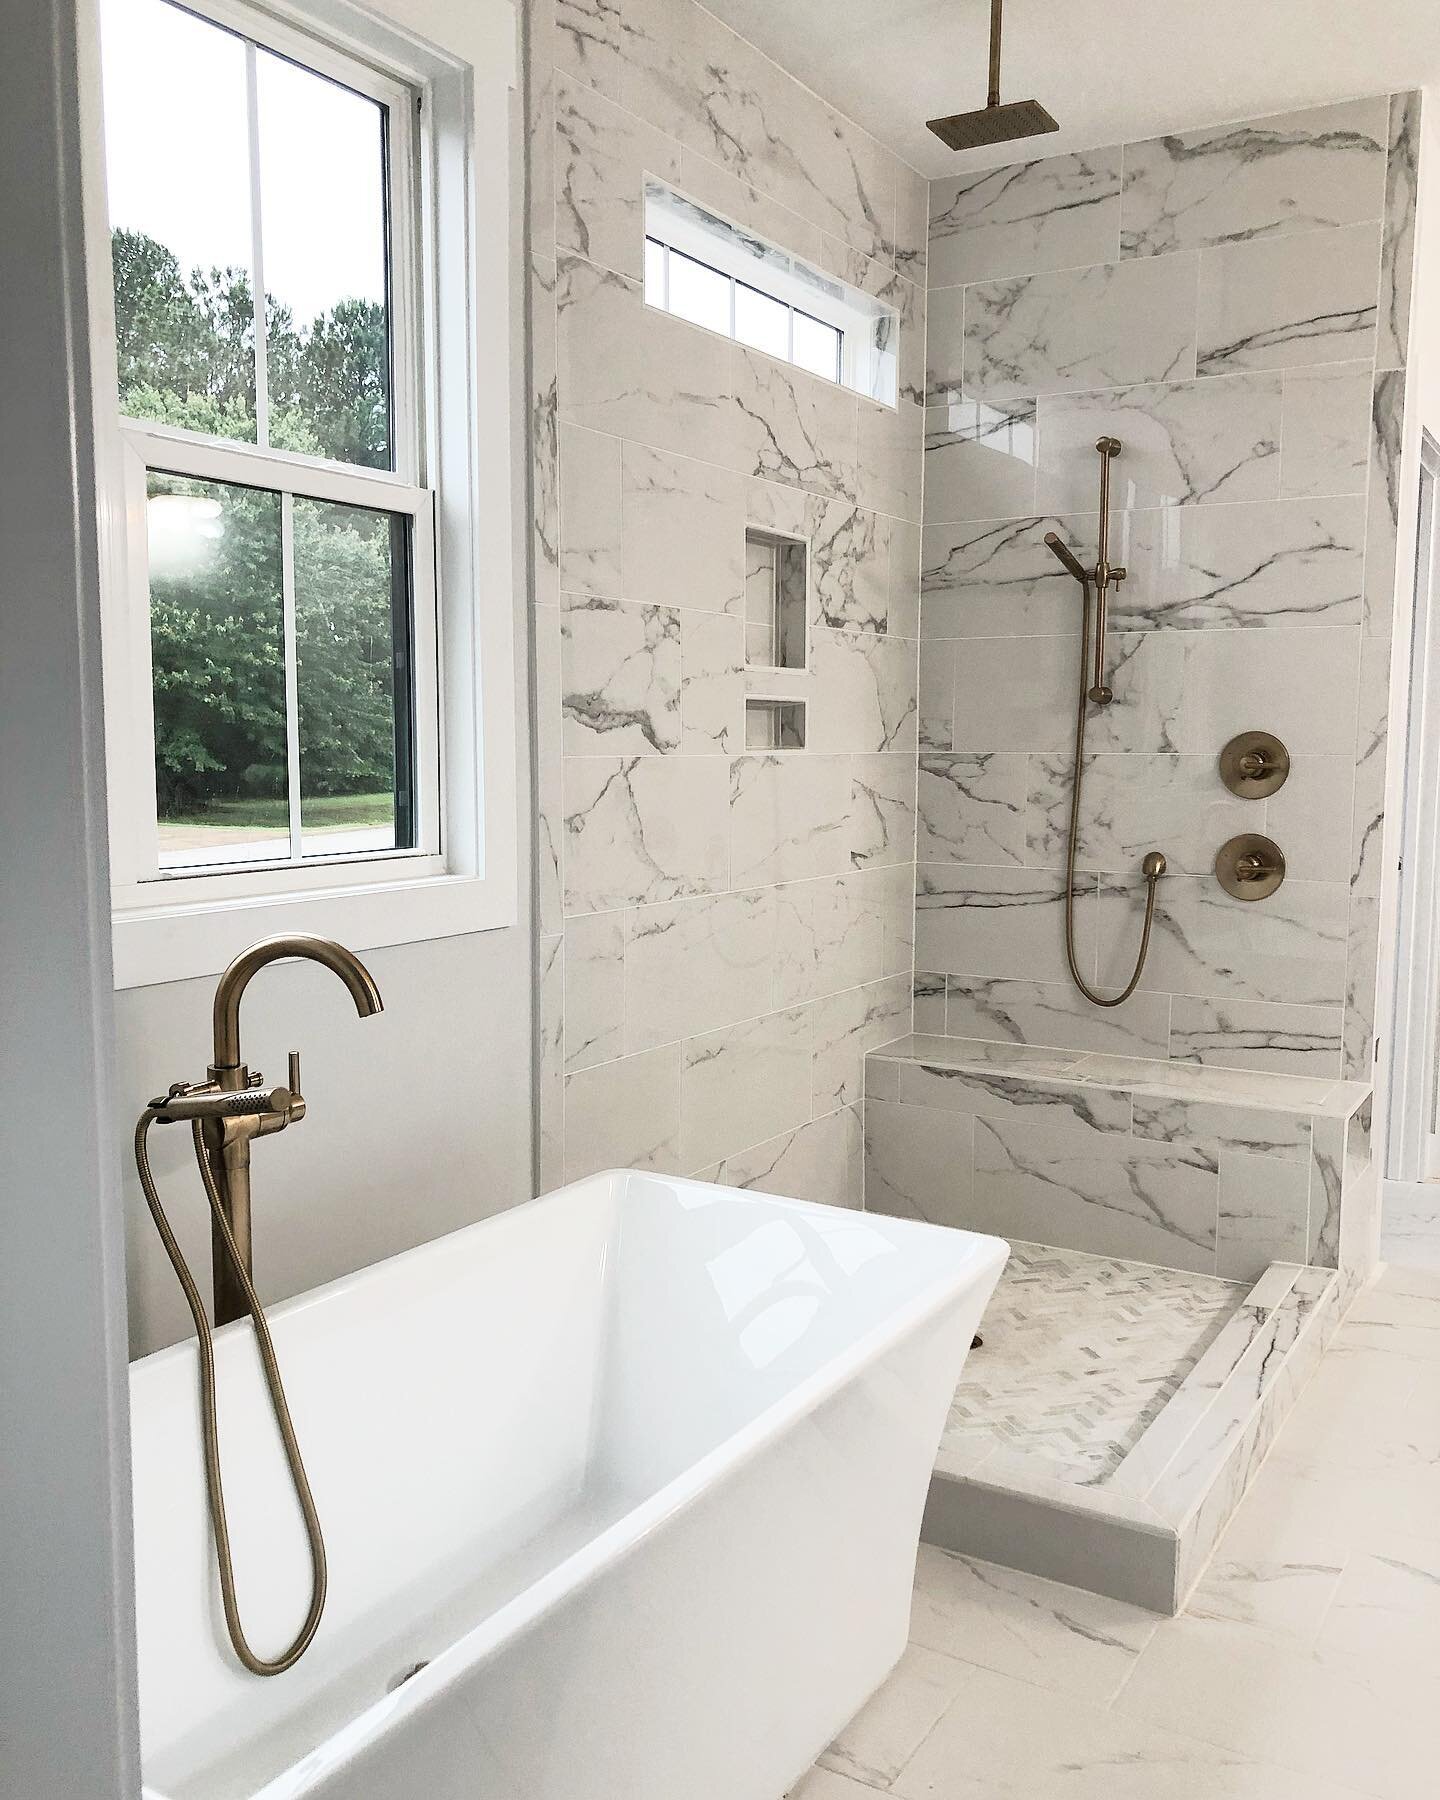 #Tiletuesday ❤️ Showcasing this beautiful tile before the glass enclosure goes up in this master bath! 🛁

Follow us ➡️ @oconnelldeveloping
www.oconnelldeveloping.com

#customhome #customhomes #customhomebuilders #custombuilder #custombuilders #custo